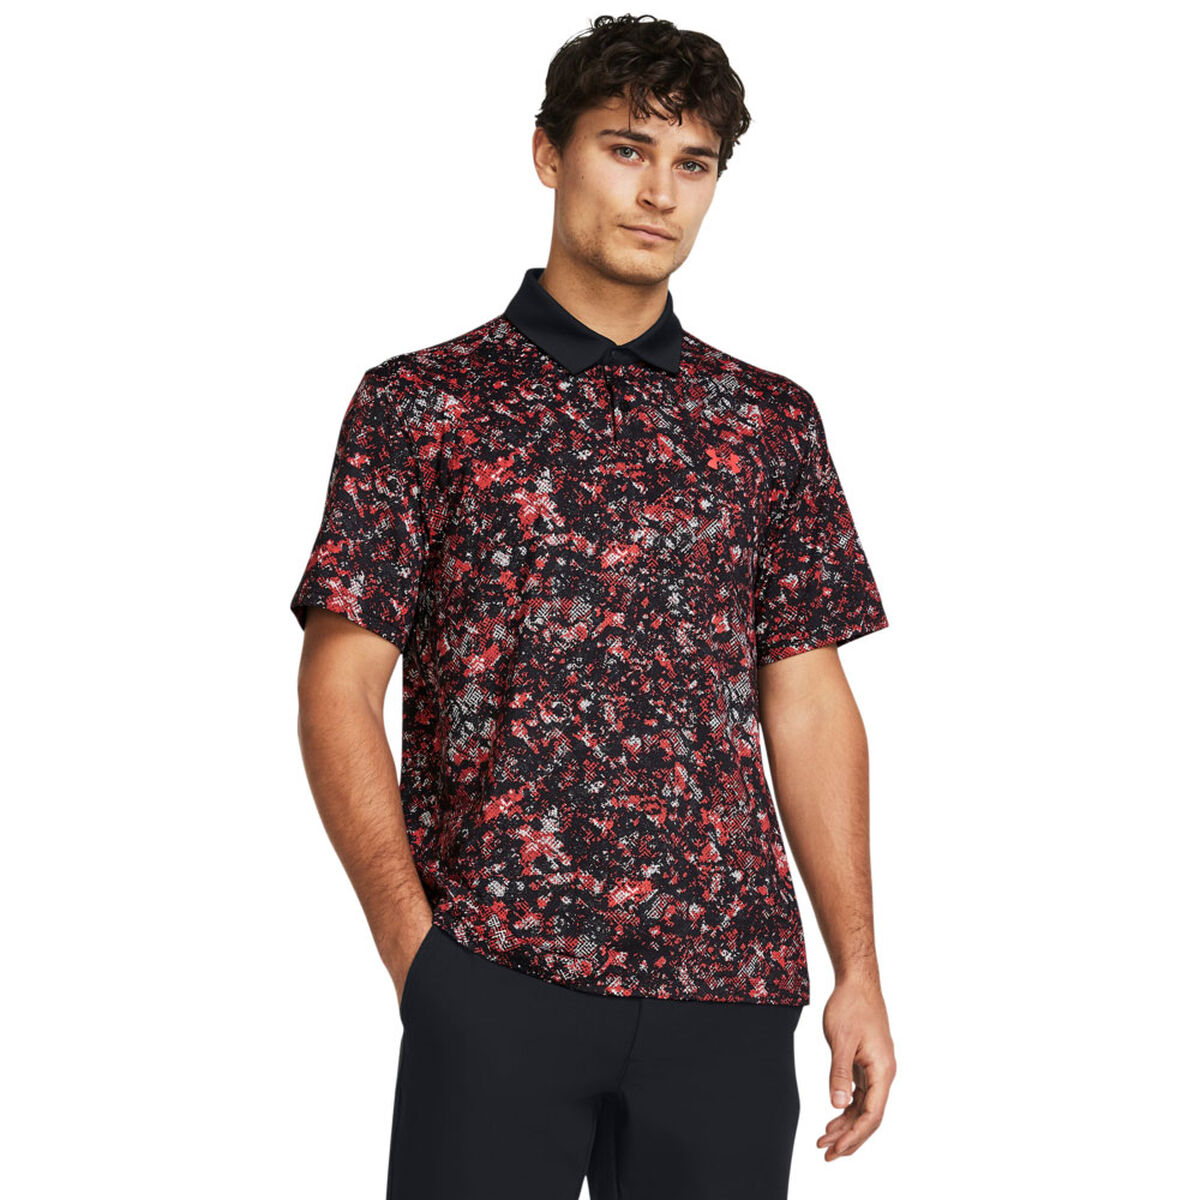 Under Armour Men’s T2G Printed Golf Polo Shirt, Mens, Black solstice, Small | American Golf